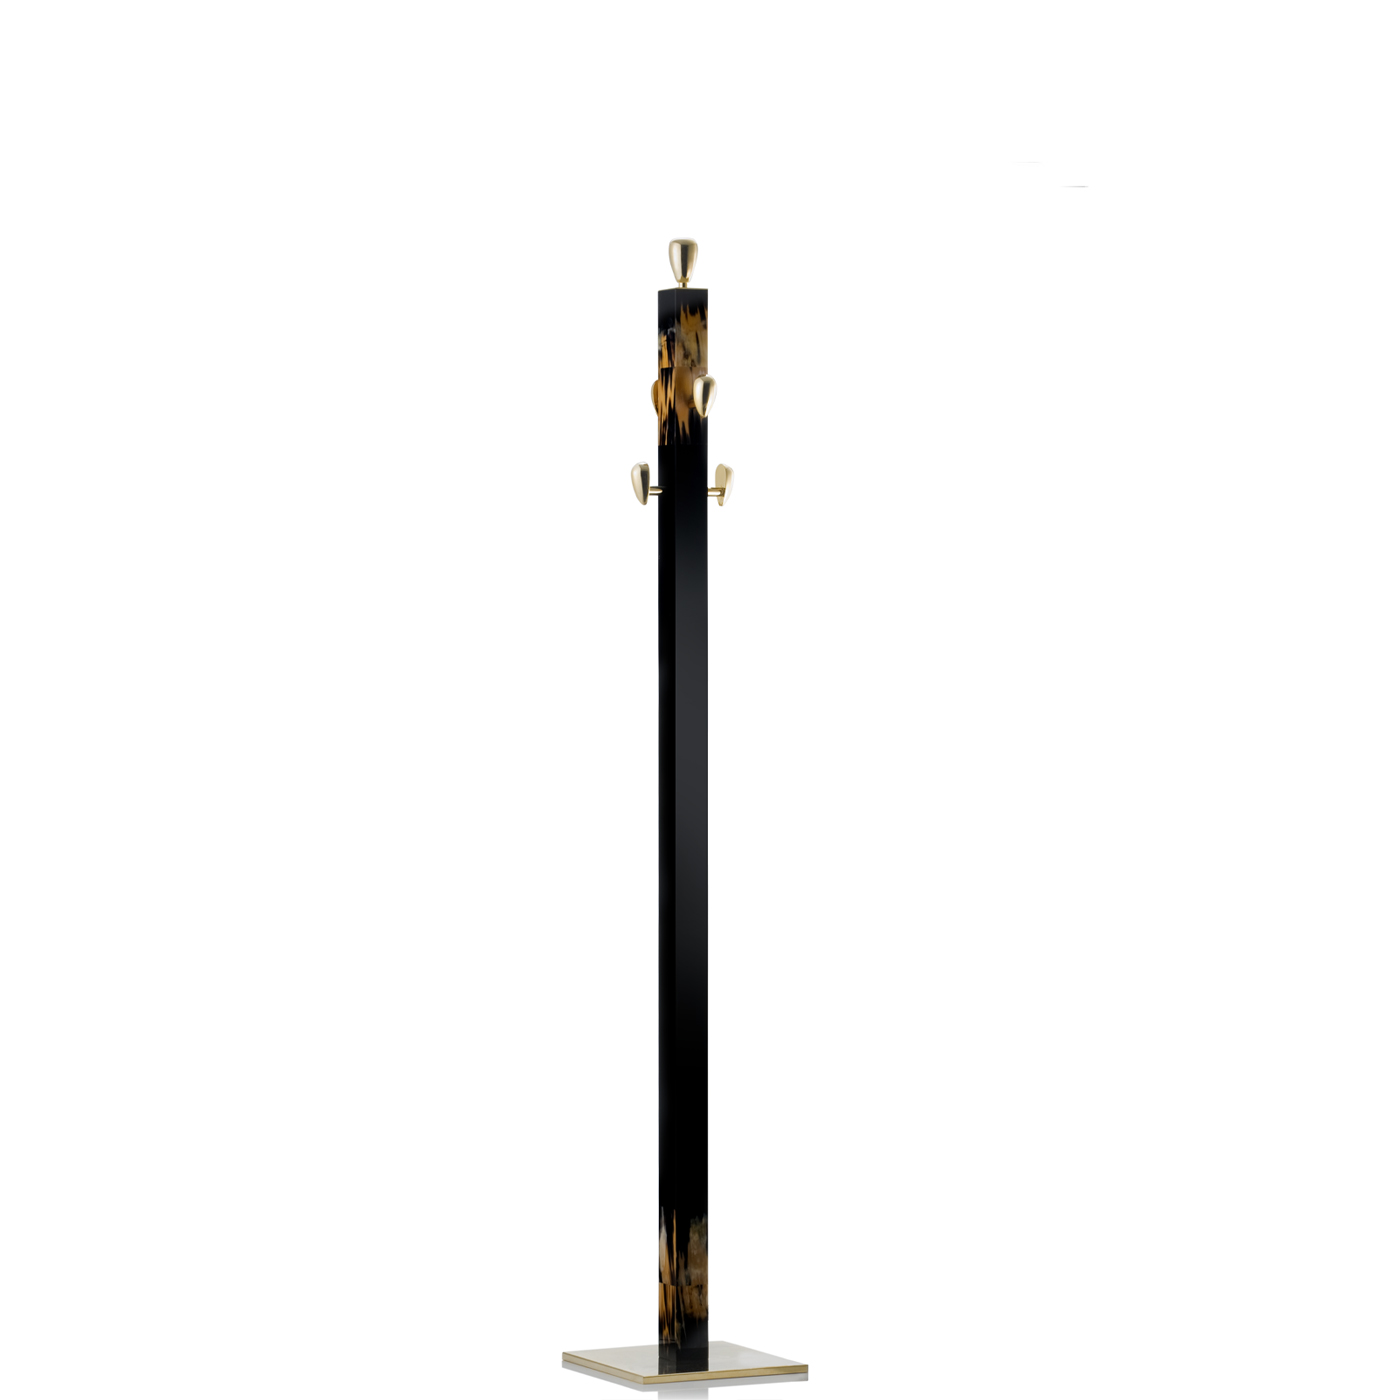 Coat stands and complementary furniture - Giglio coat stand in horn and lacquered wood with gloss finish mod. 1433s - Arcahorn